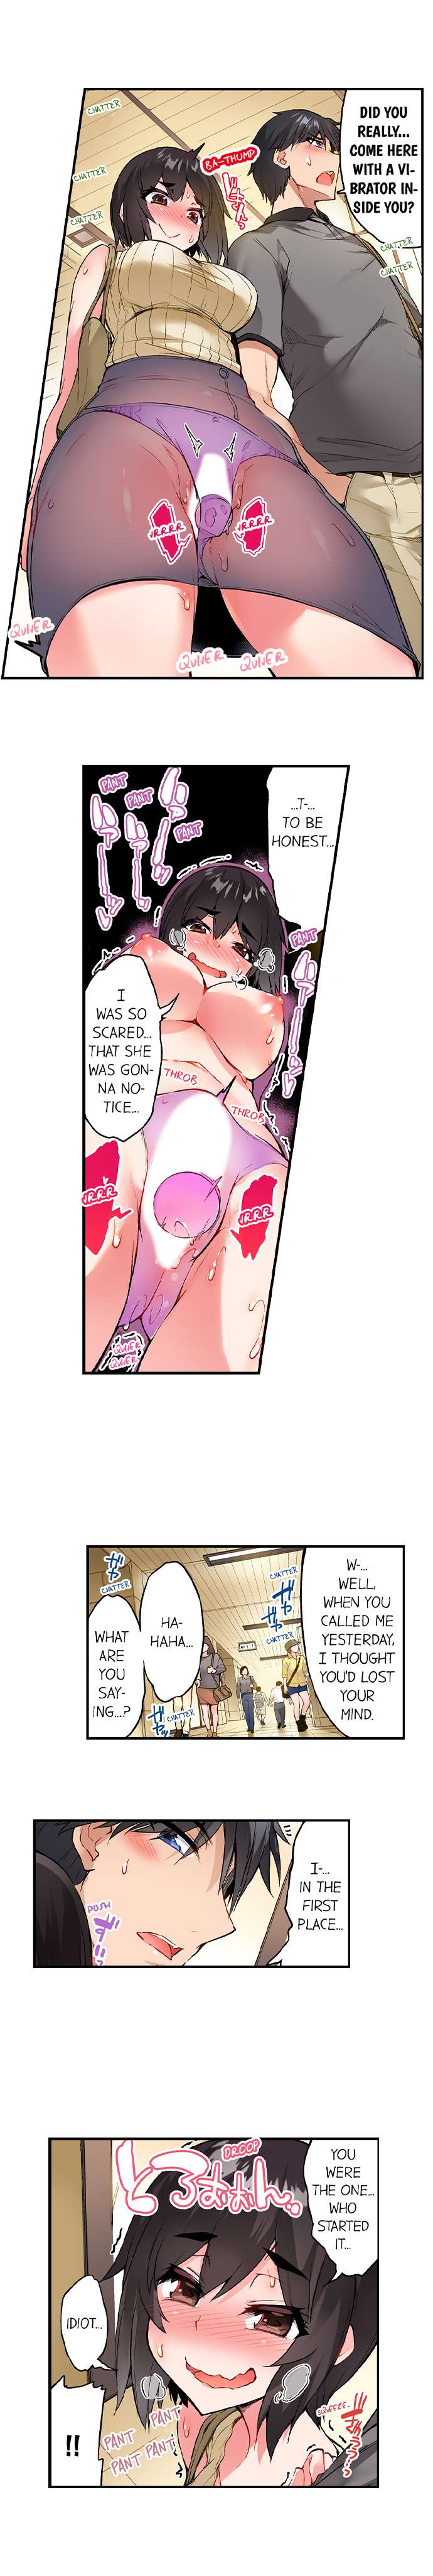 Traditional Job of Washing Girls’ Body - Chapter 143 Page 9